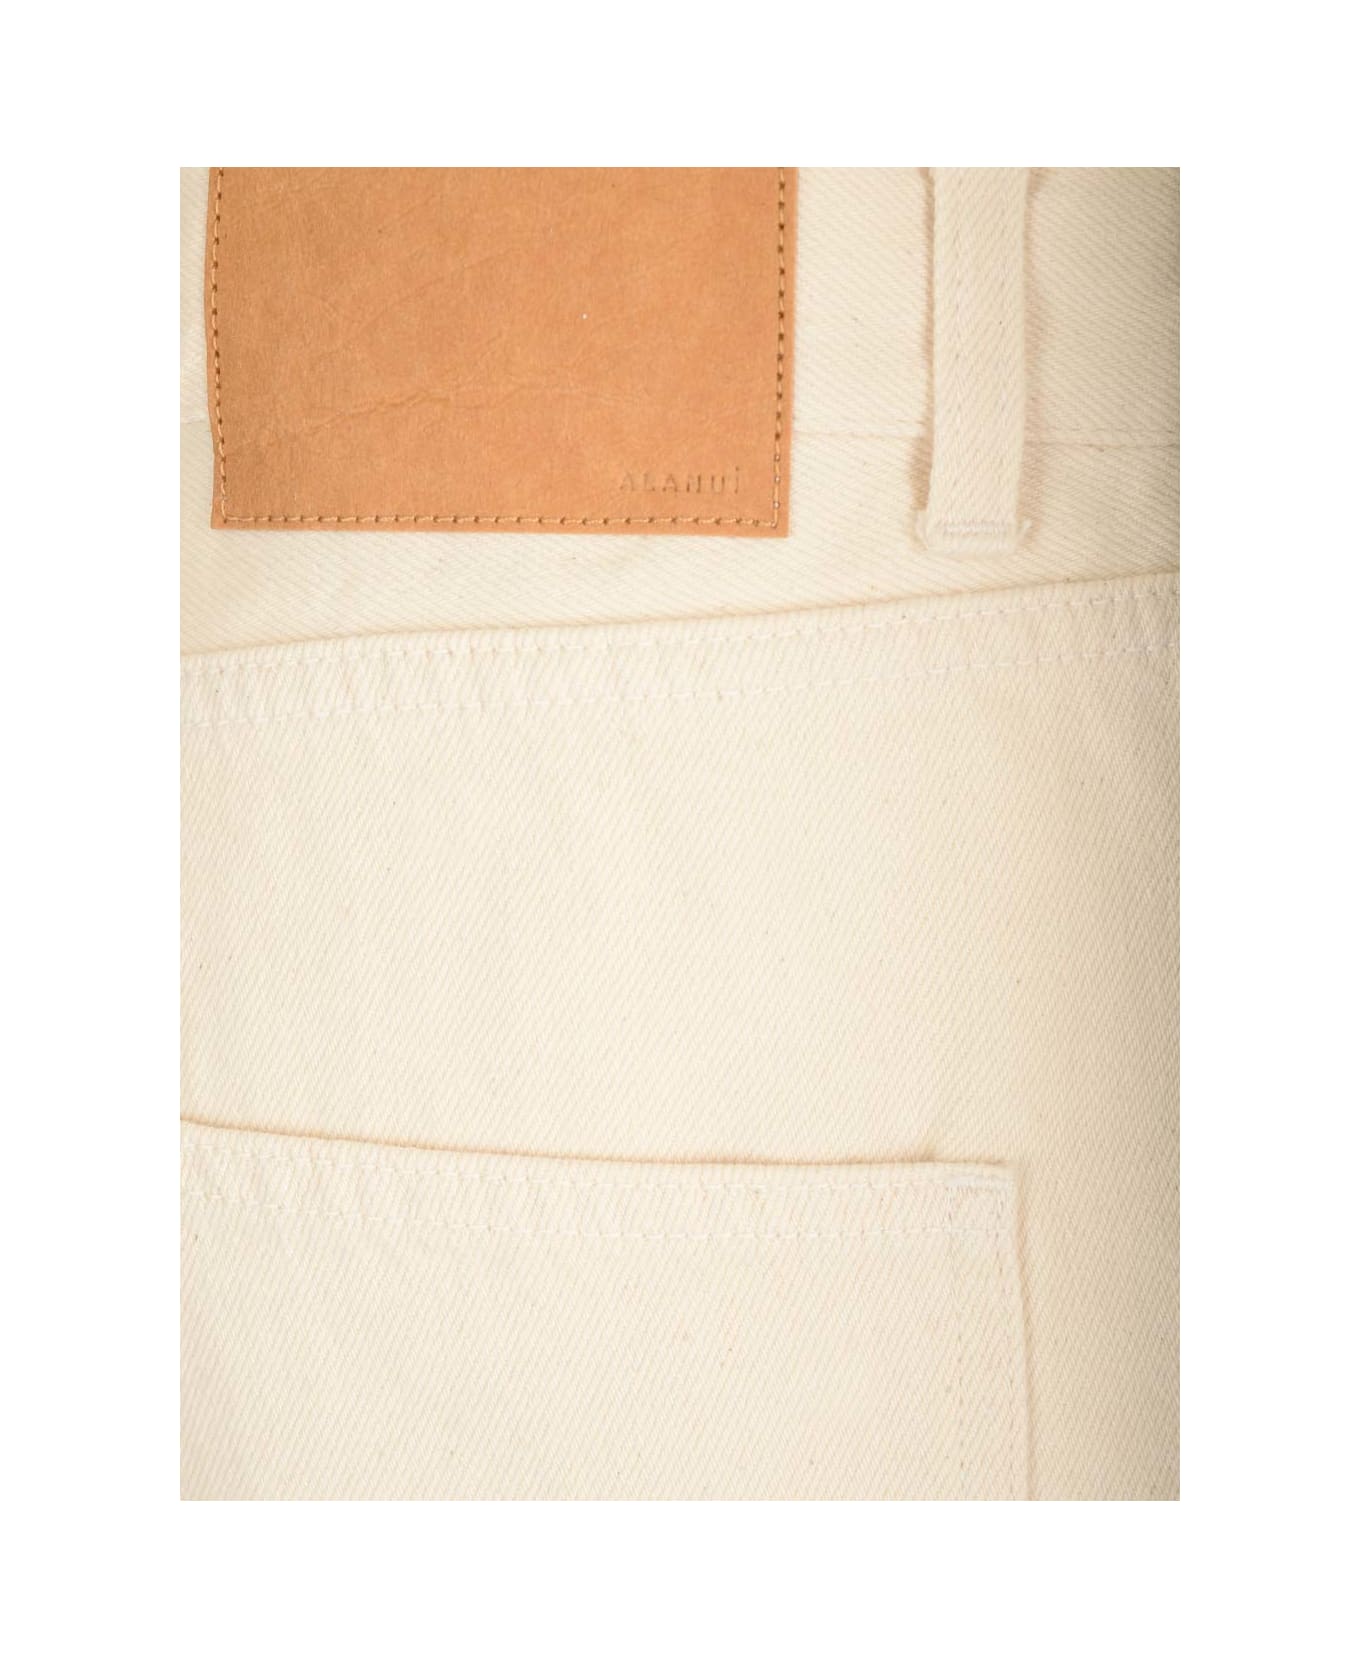 Alanui Straight Jeans With Dip-dye Effect - NEUTRALS